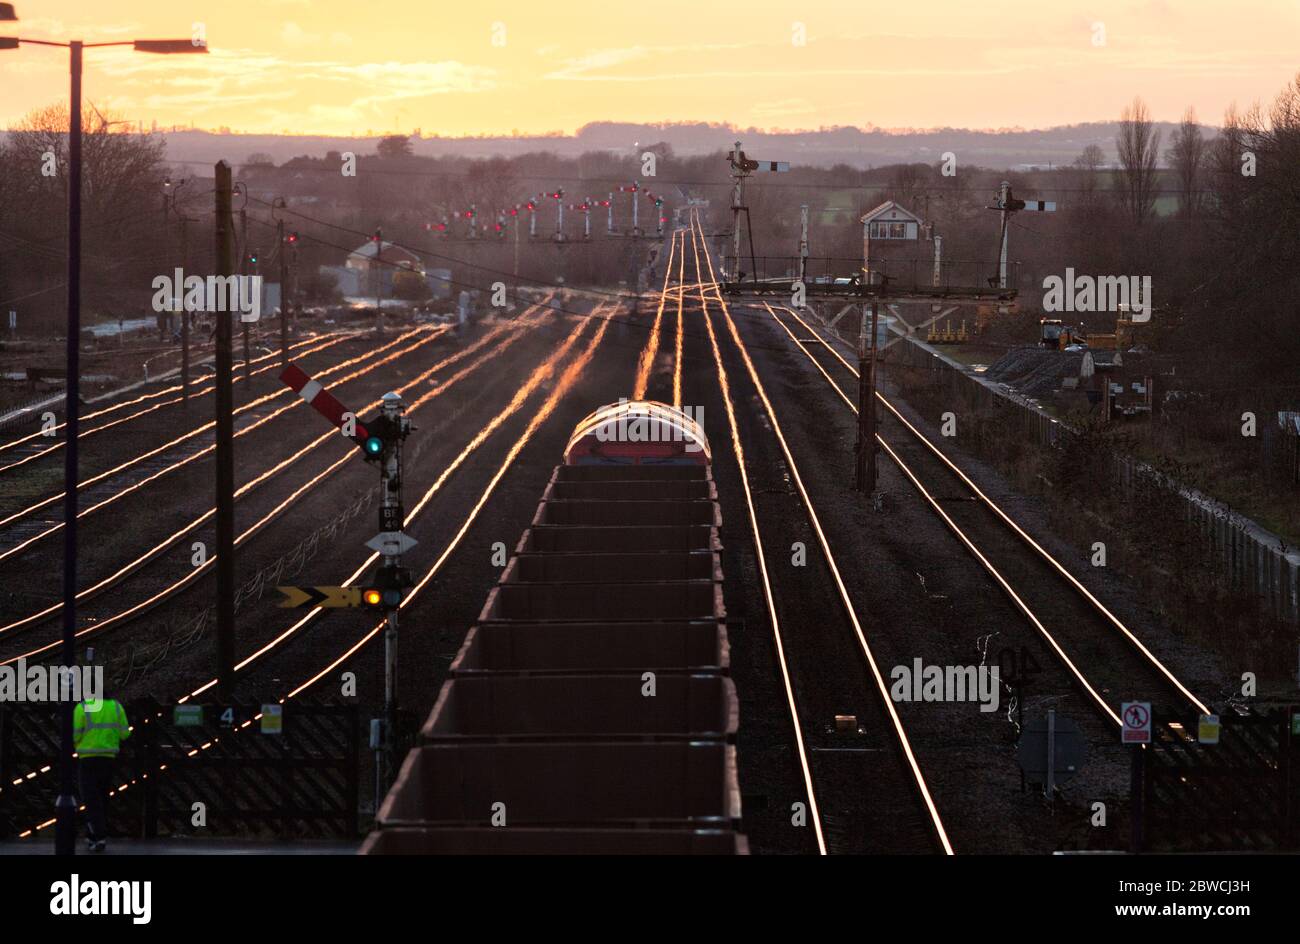 Freight train carrying Iron Ore passing The mechanical semaphore signals at Barnetby with the setting sun glinting off the rails Stock Photo